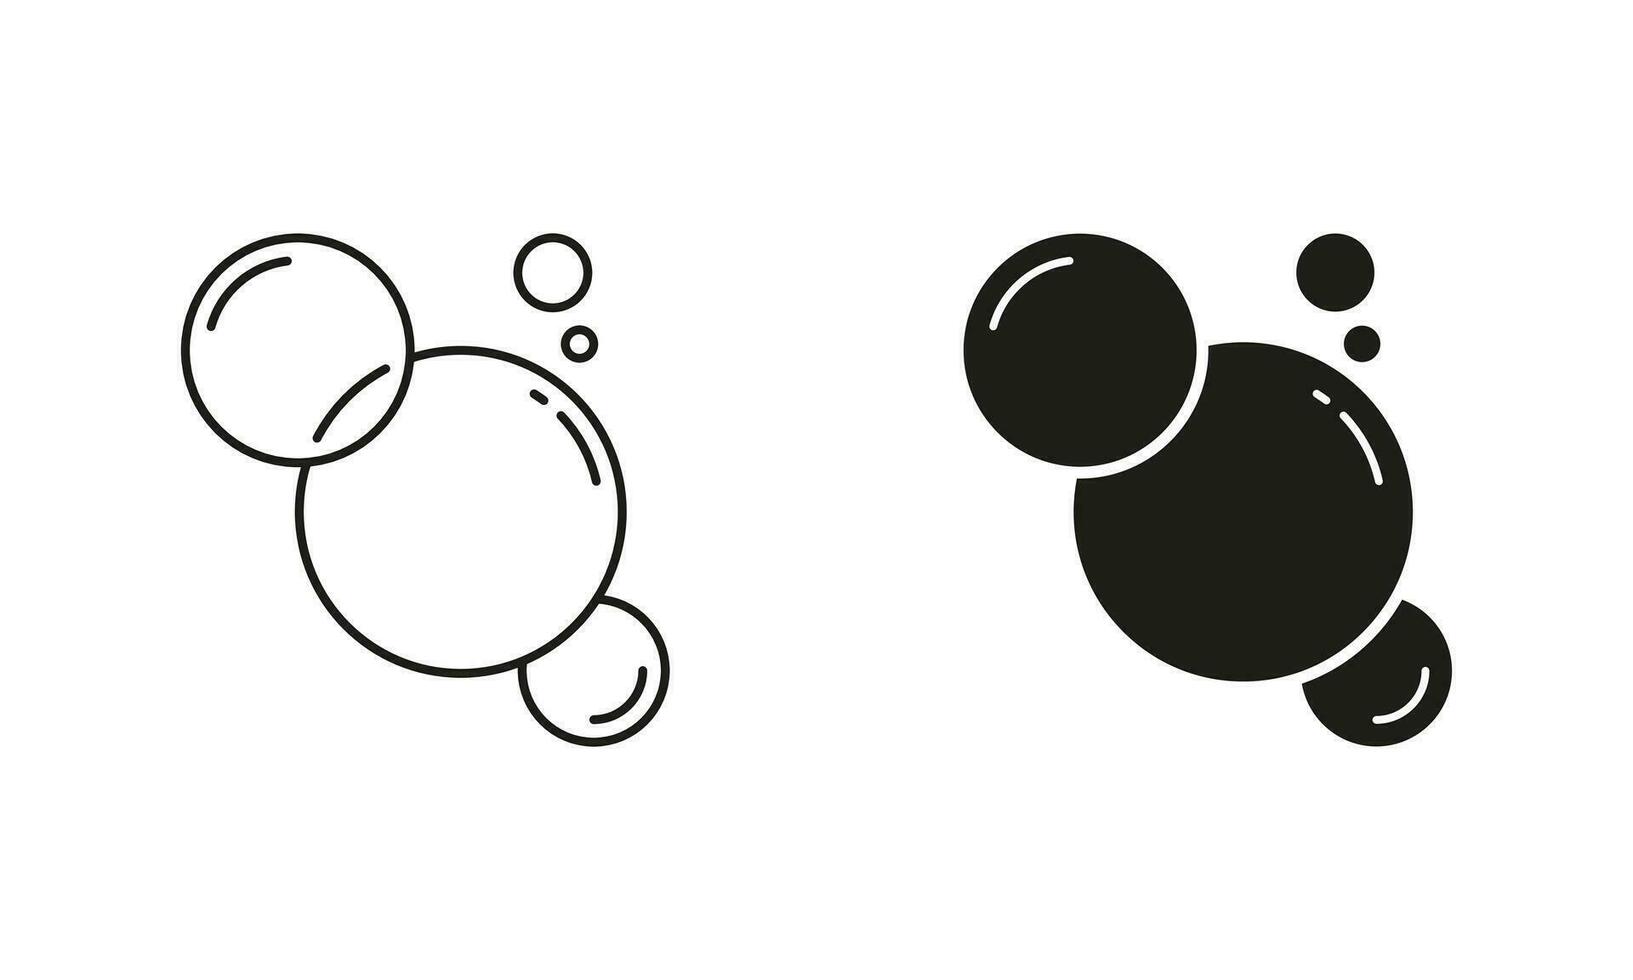 Soap Bubble Line and Silhouette Black Icon Set. Sphere Foam Pictogram, Clean Water. Champagne Drops, Soda Symbol Collection. Underwater Ball. Air Oxygen. Isolated Vector Illustration.